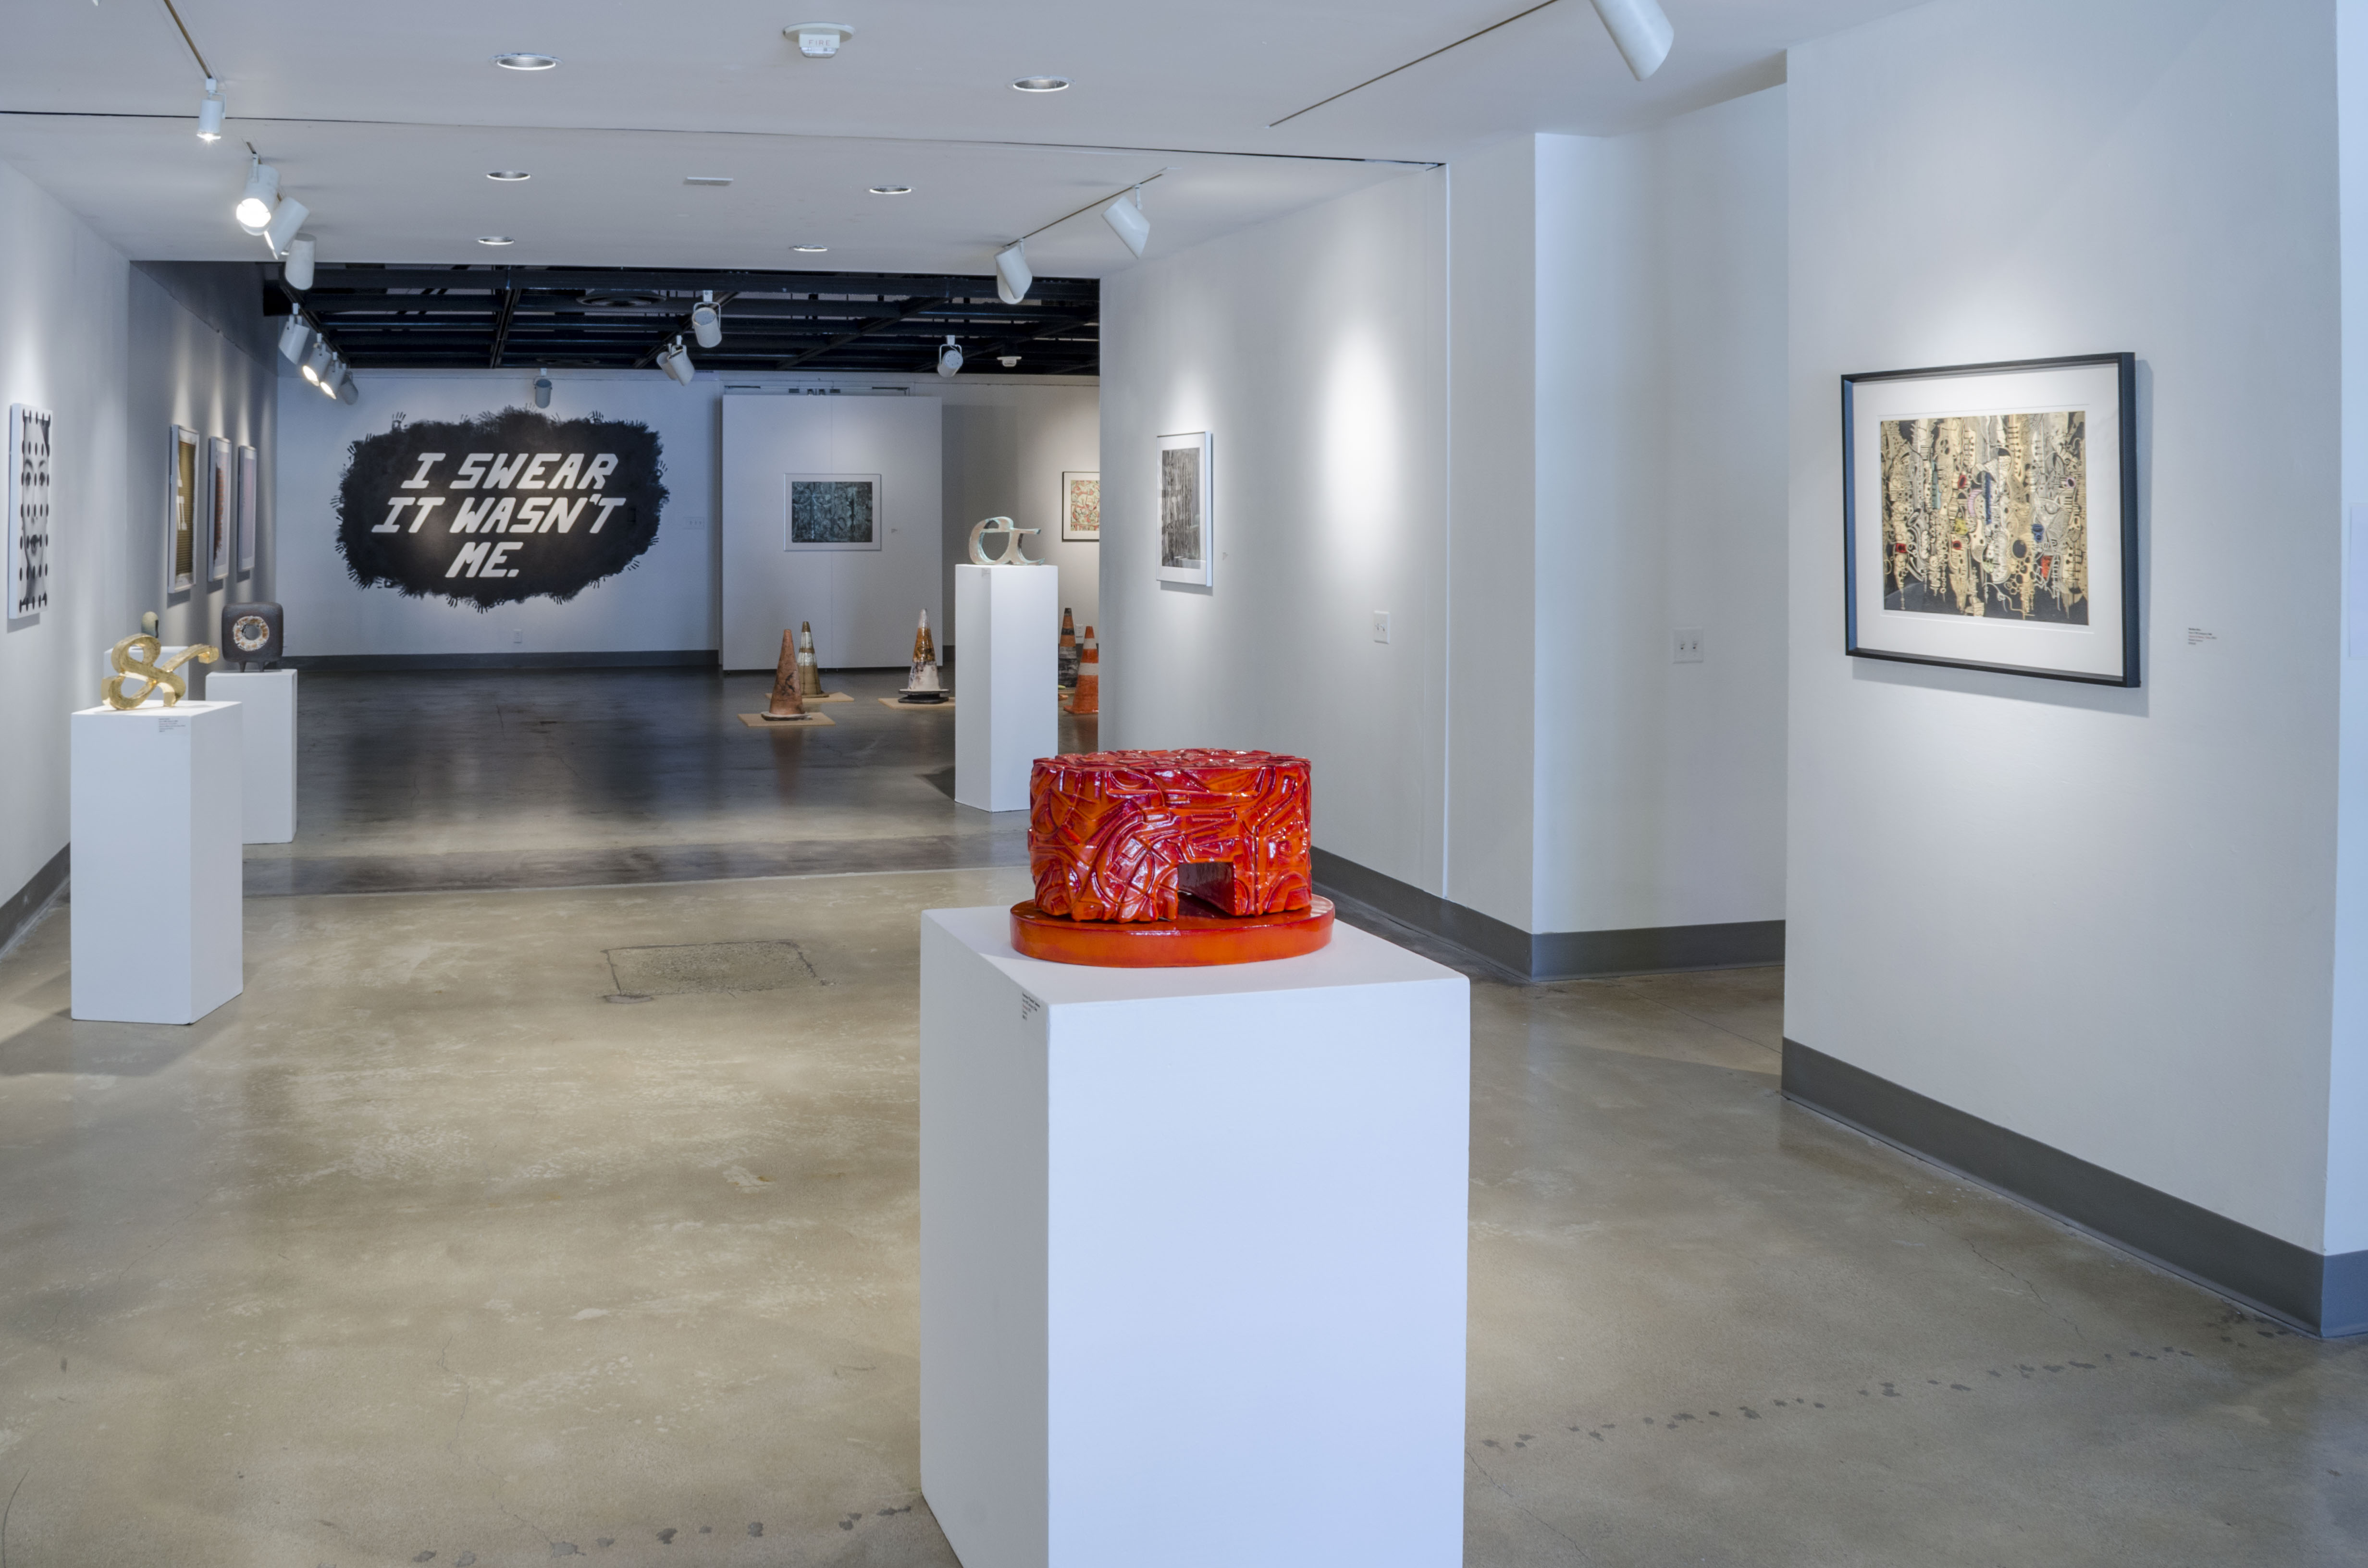 Installation View, Corridor of Gallery, Ink & Clay 40 Exhibition, Sept. 13, 2014 to Oct. 23, 2014.